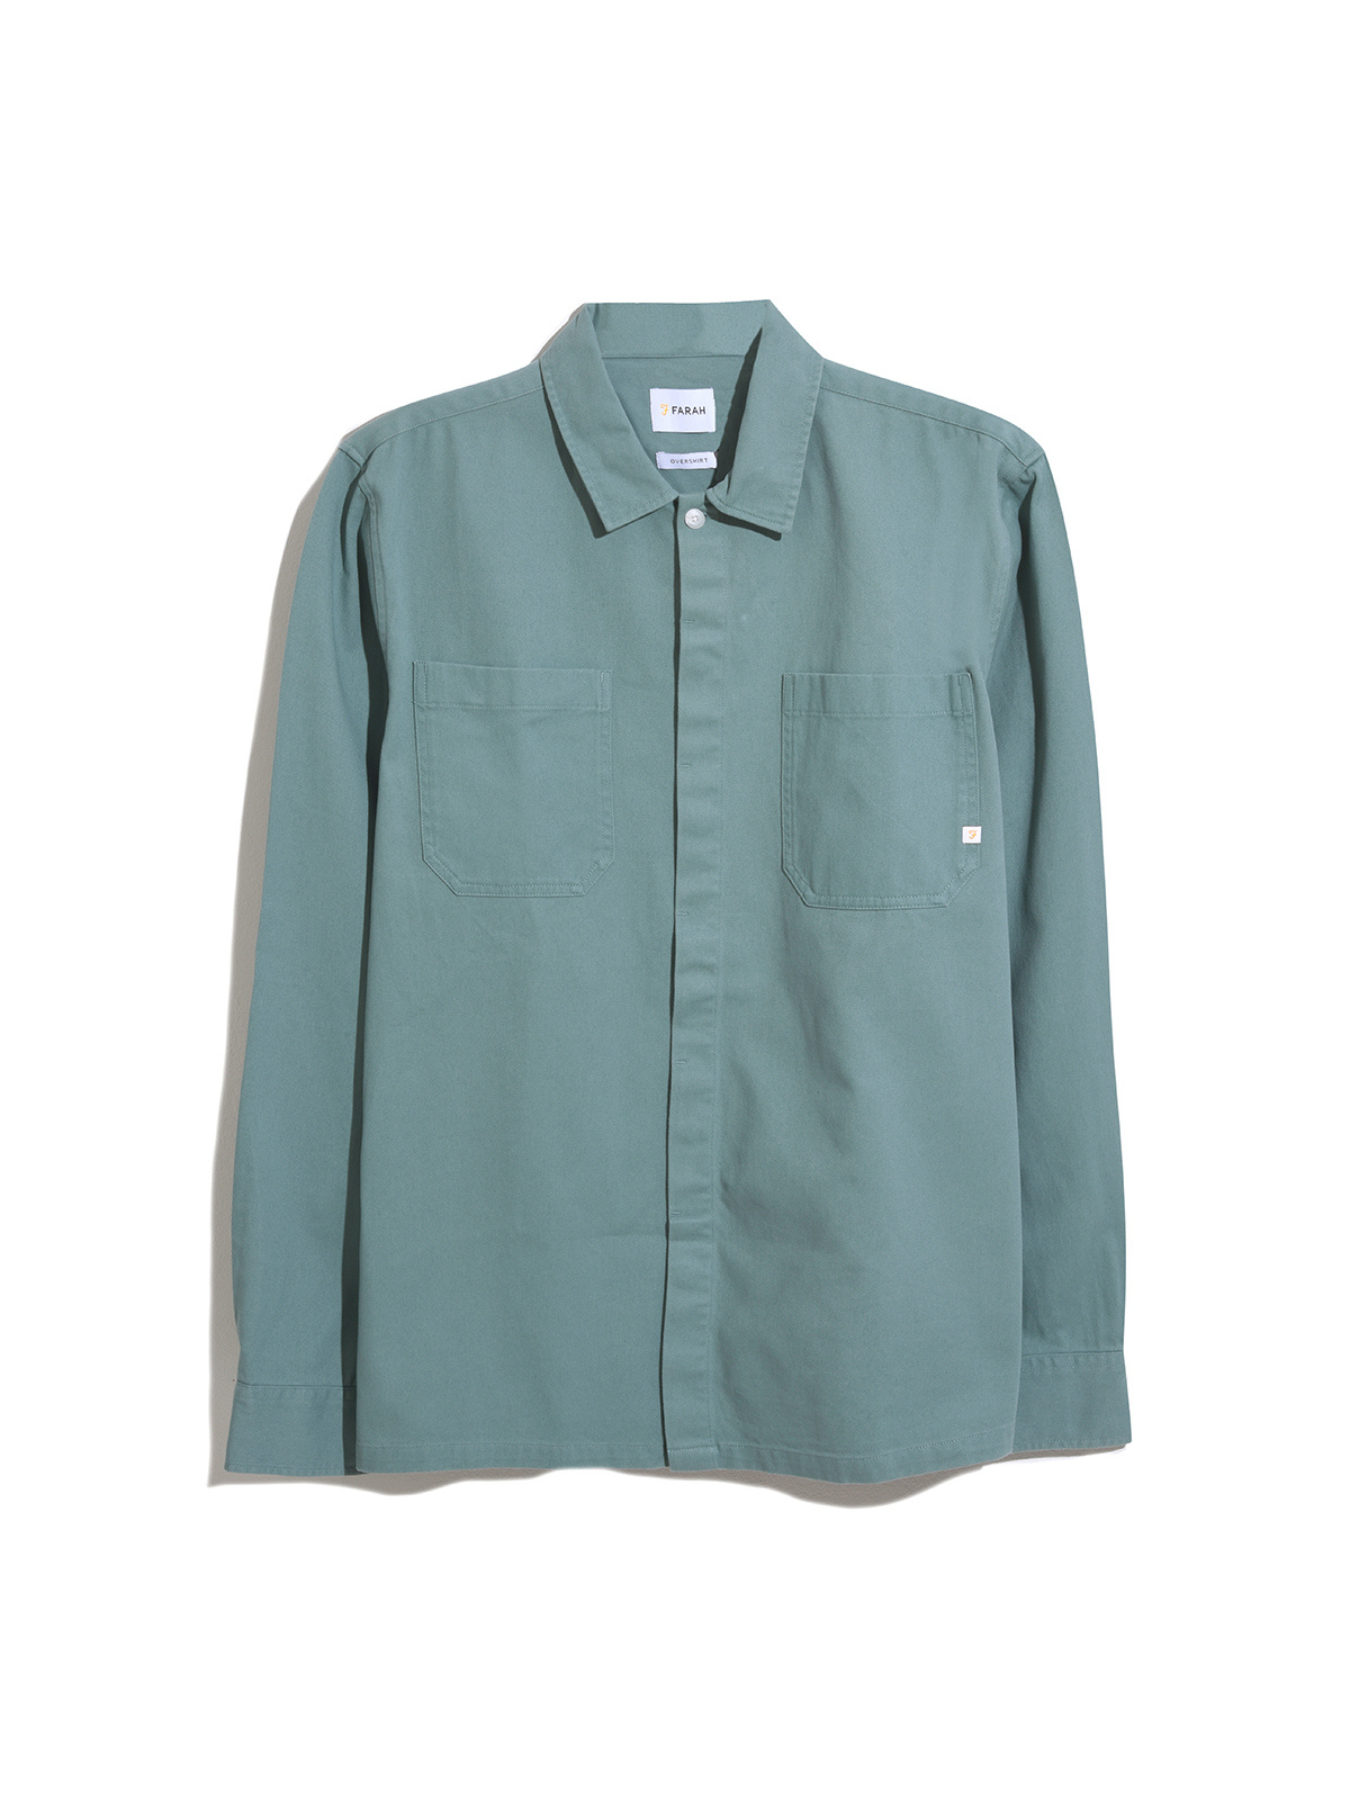 View Leon Relaxed Fit Long Sleeve Shirt In Brook Blue information